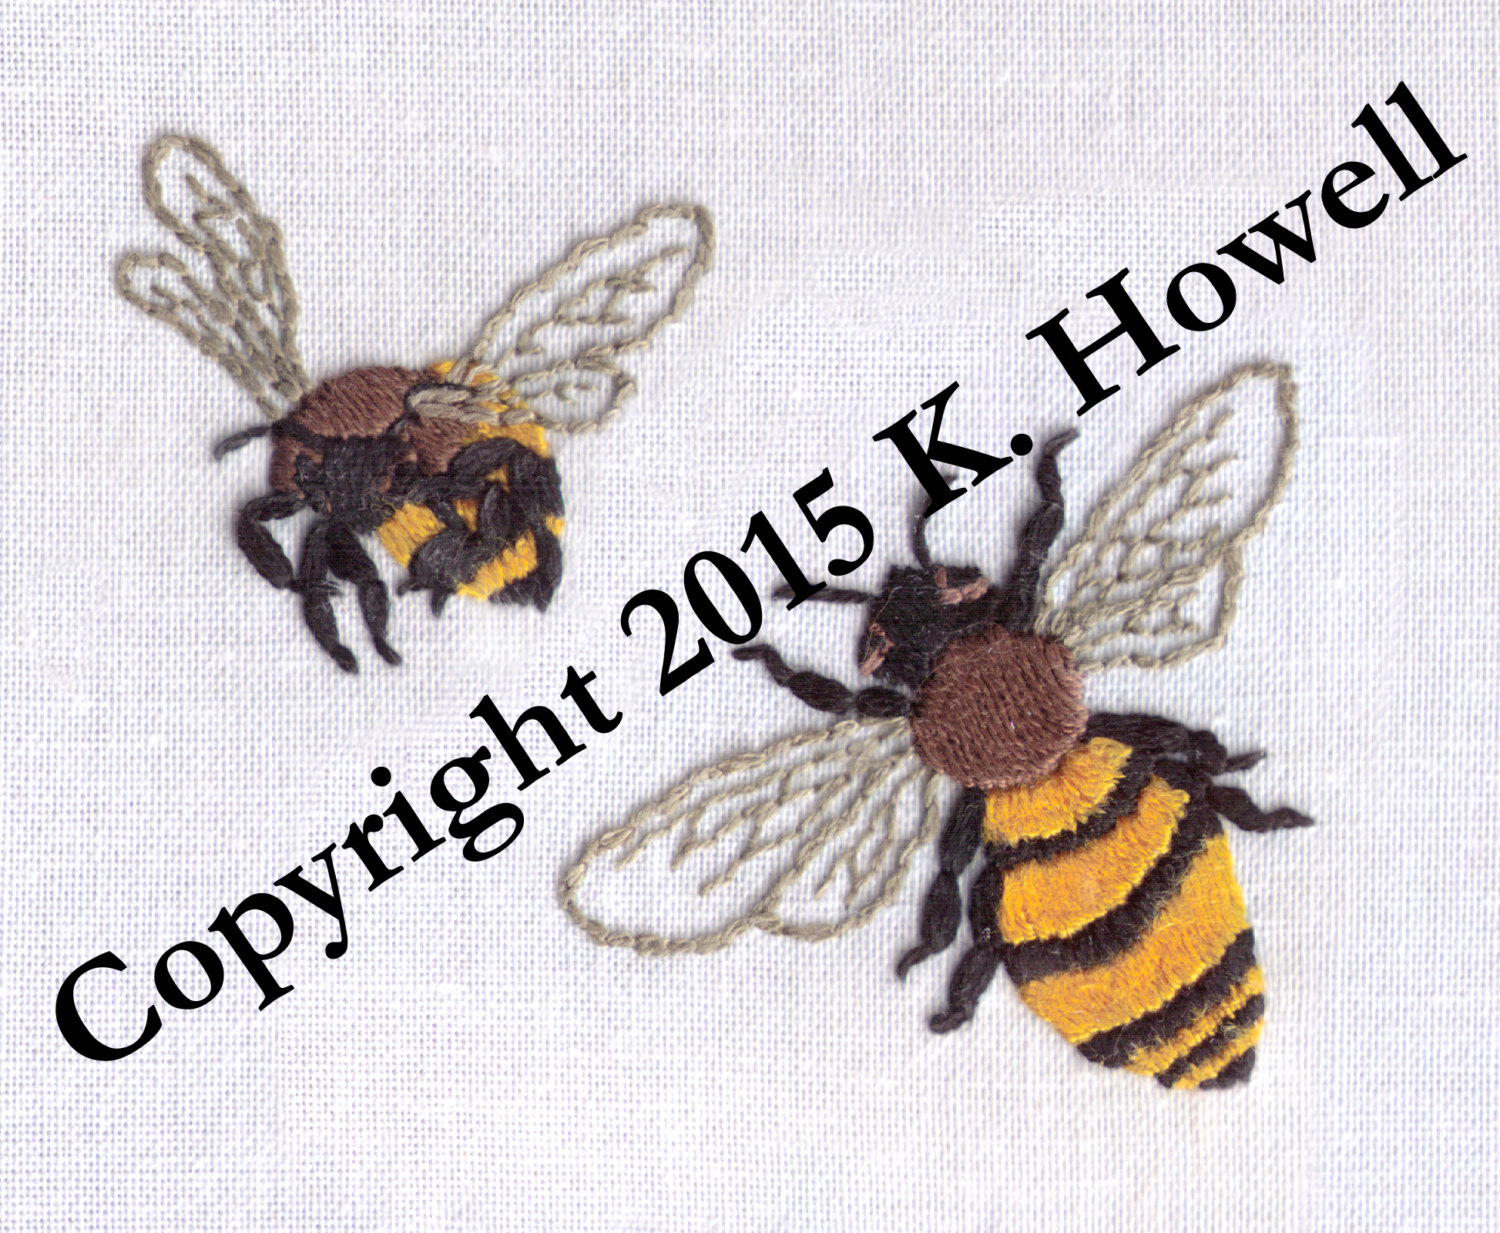 Bumble Bee Embroidery Pattern Bee Hand Embroidery Pattern Bees Honey Bee Bumble Bee Pollinator Bug Insect Pollen Hive Pdf